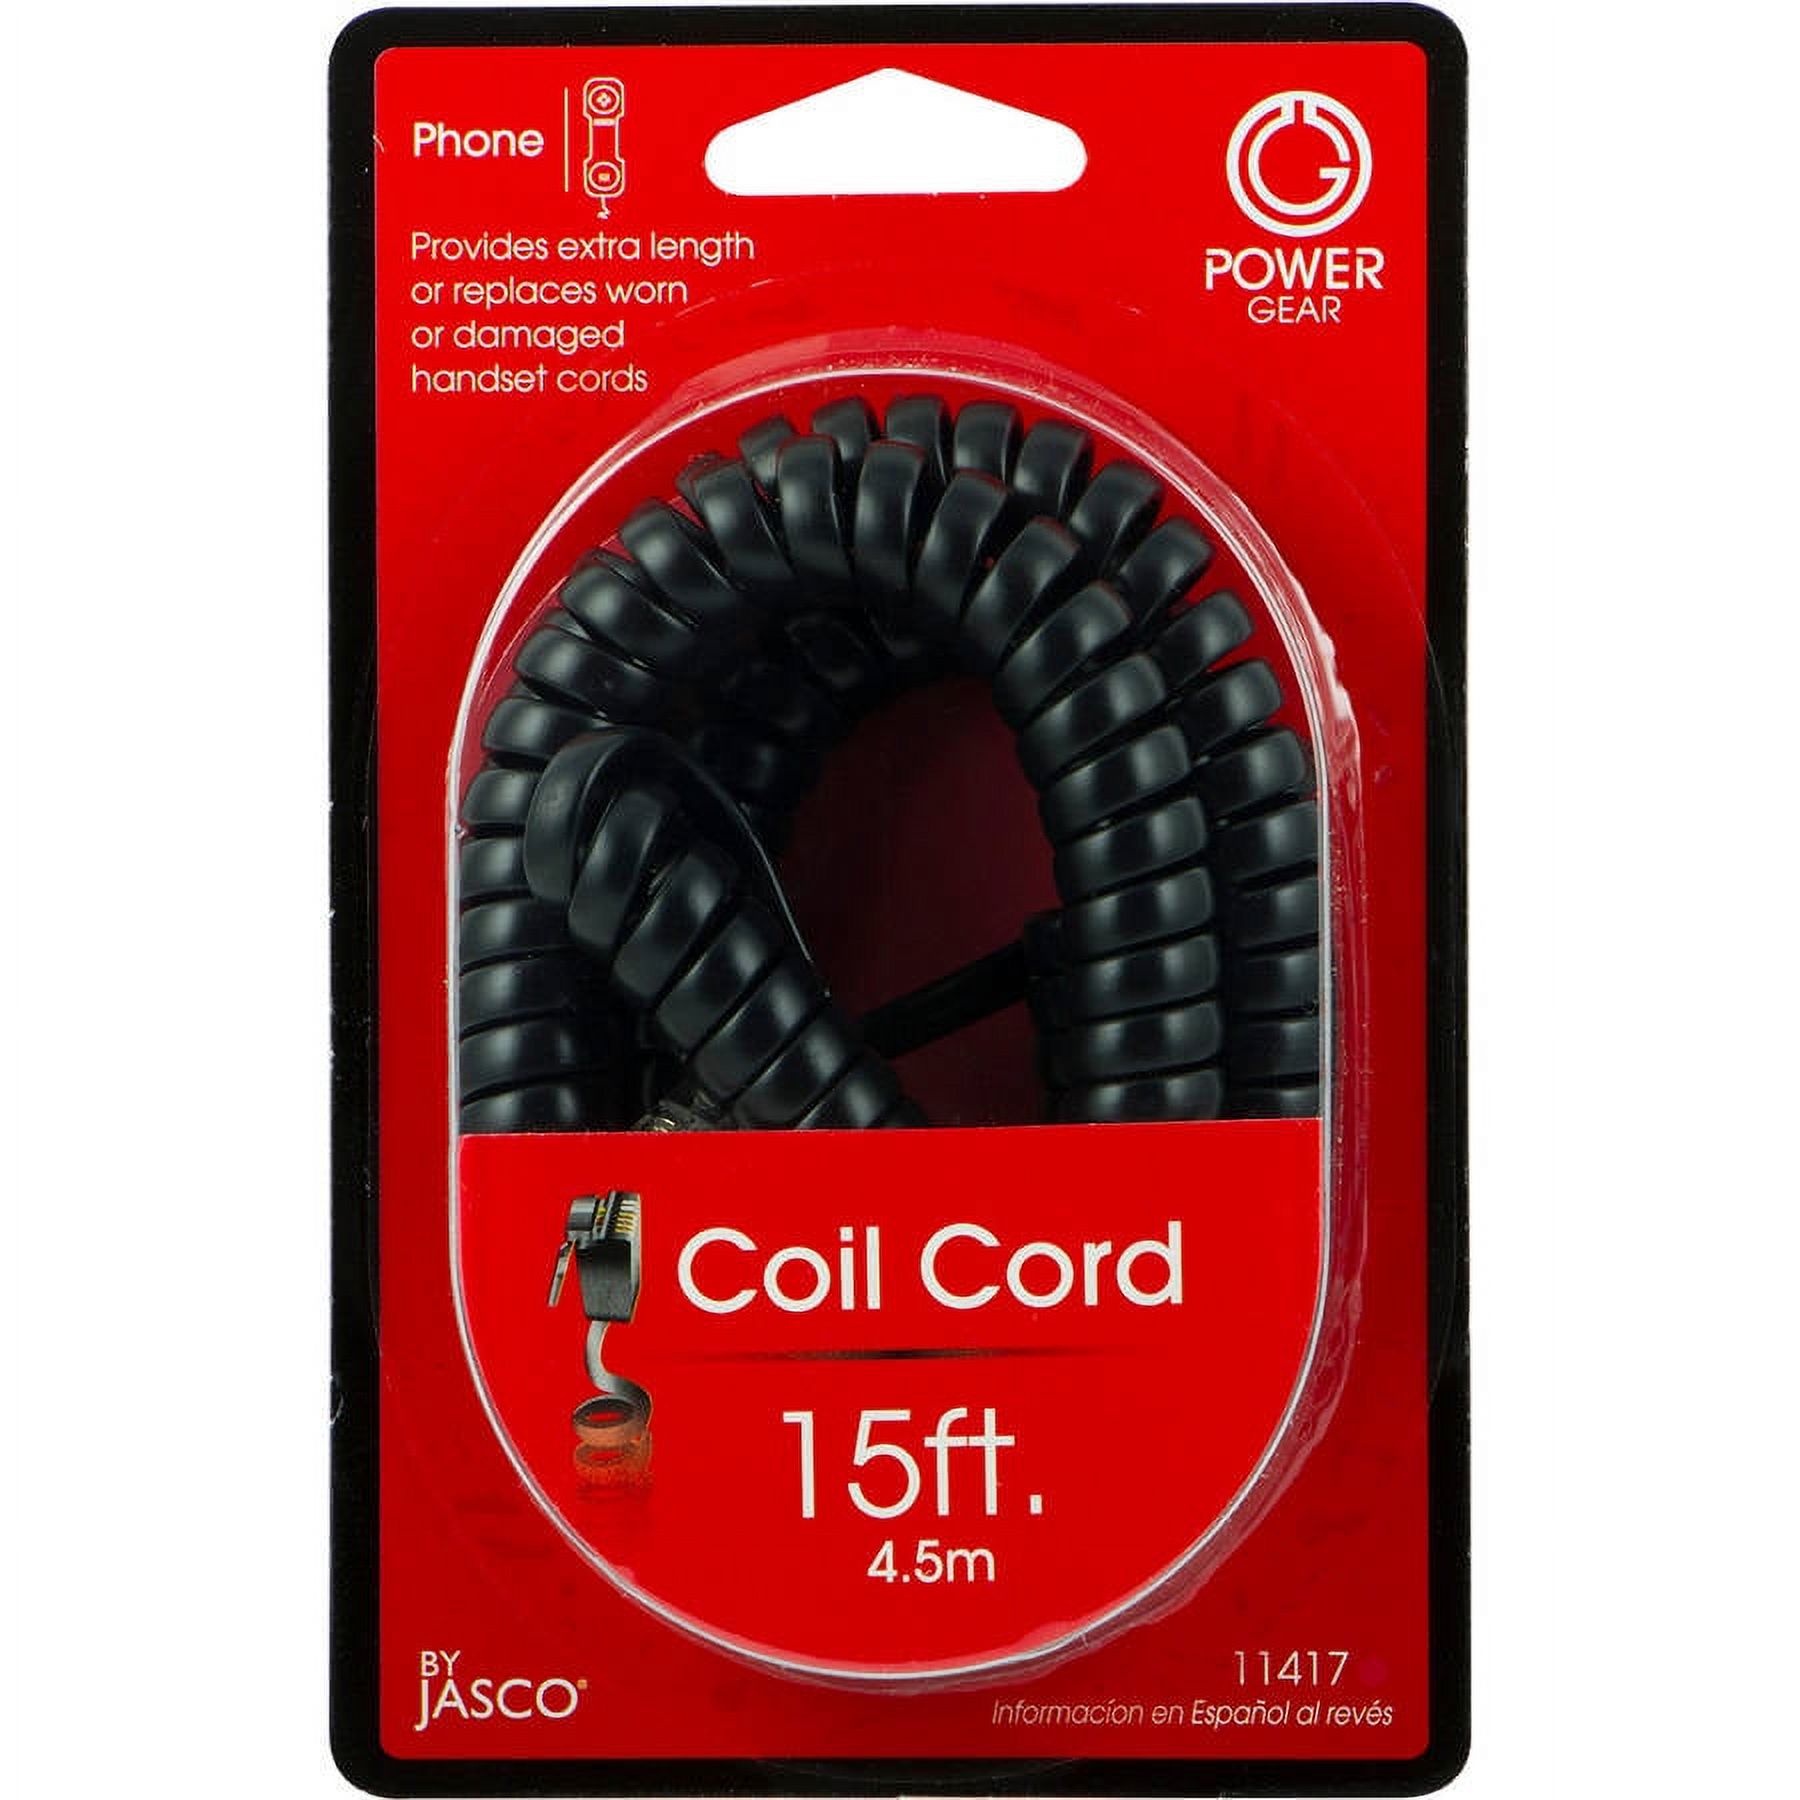 Telephone Coiled Handset Cord, 15 Ft., Black - image 2 of 2